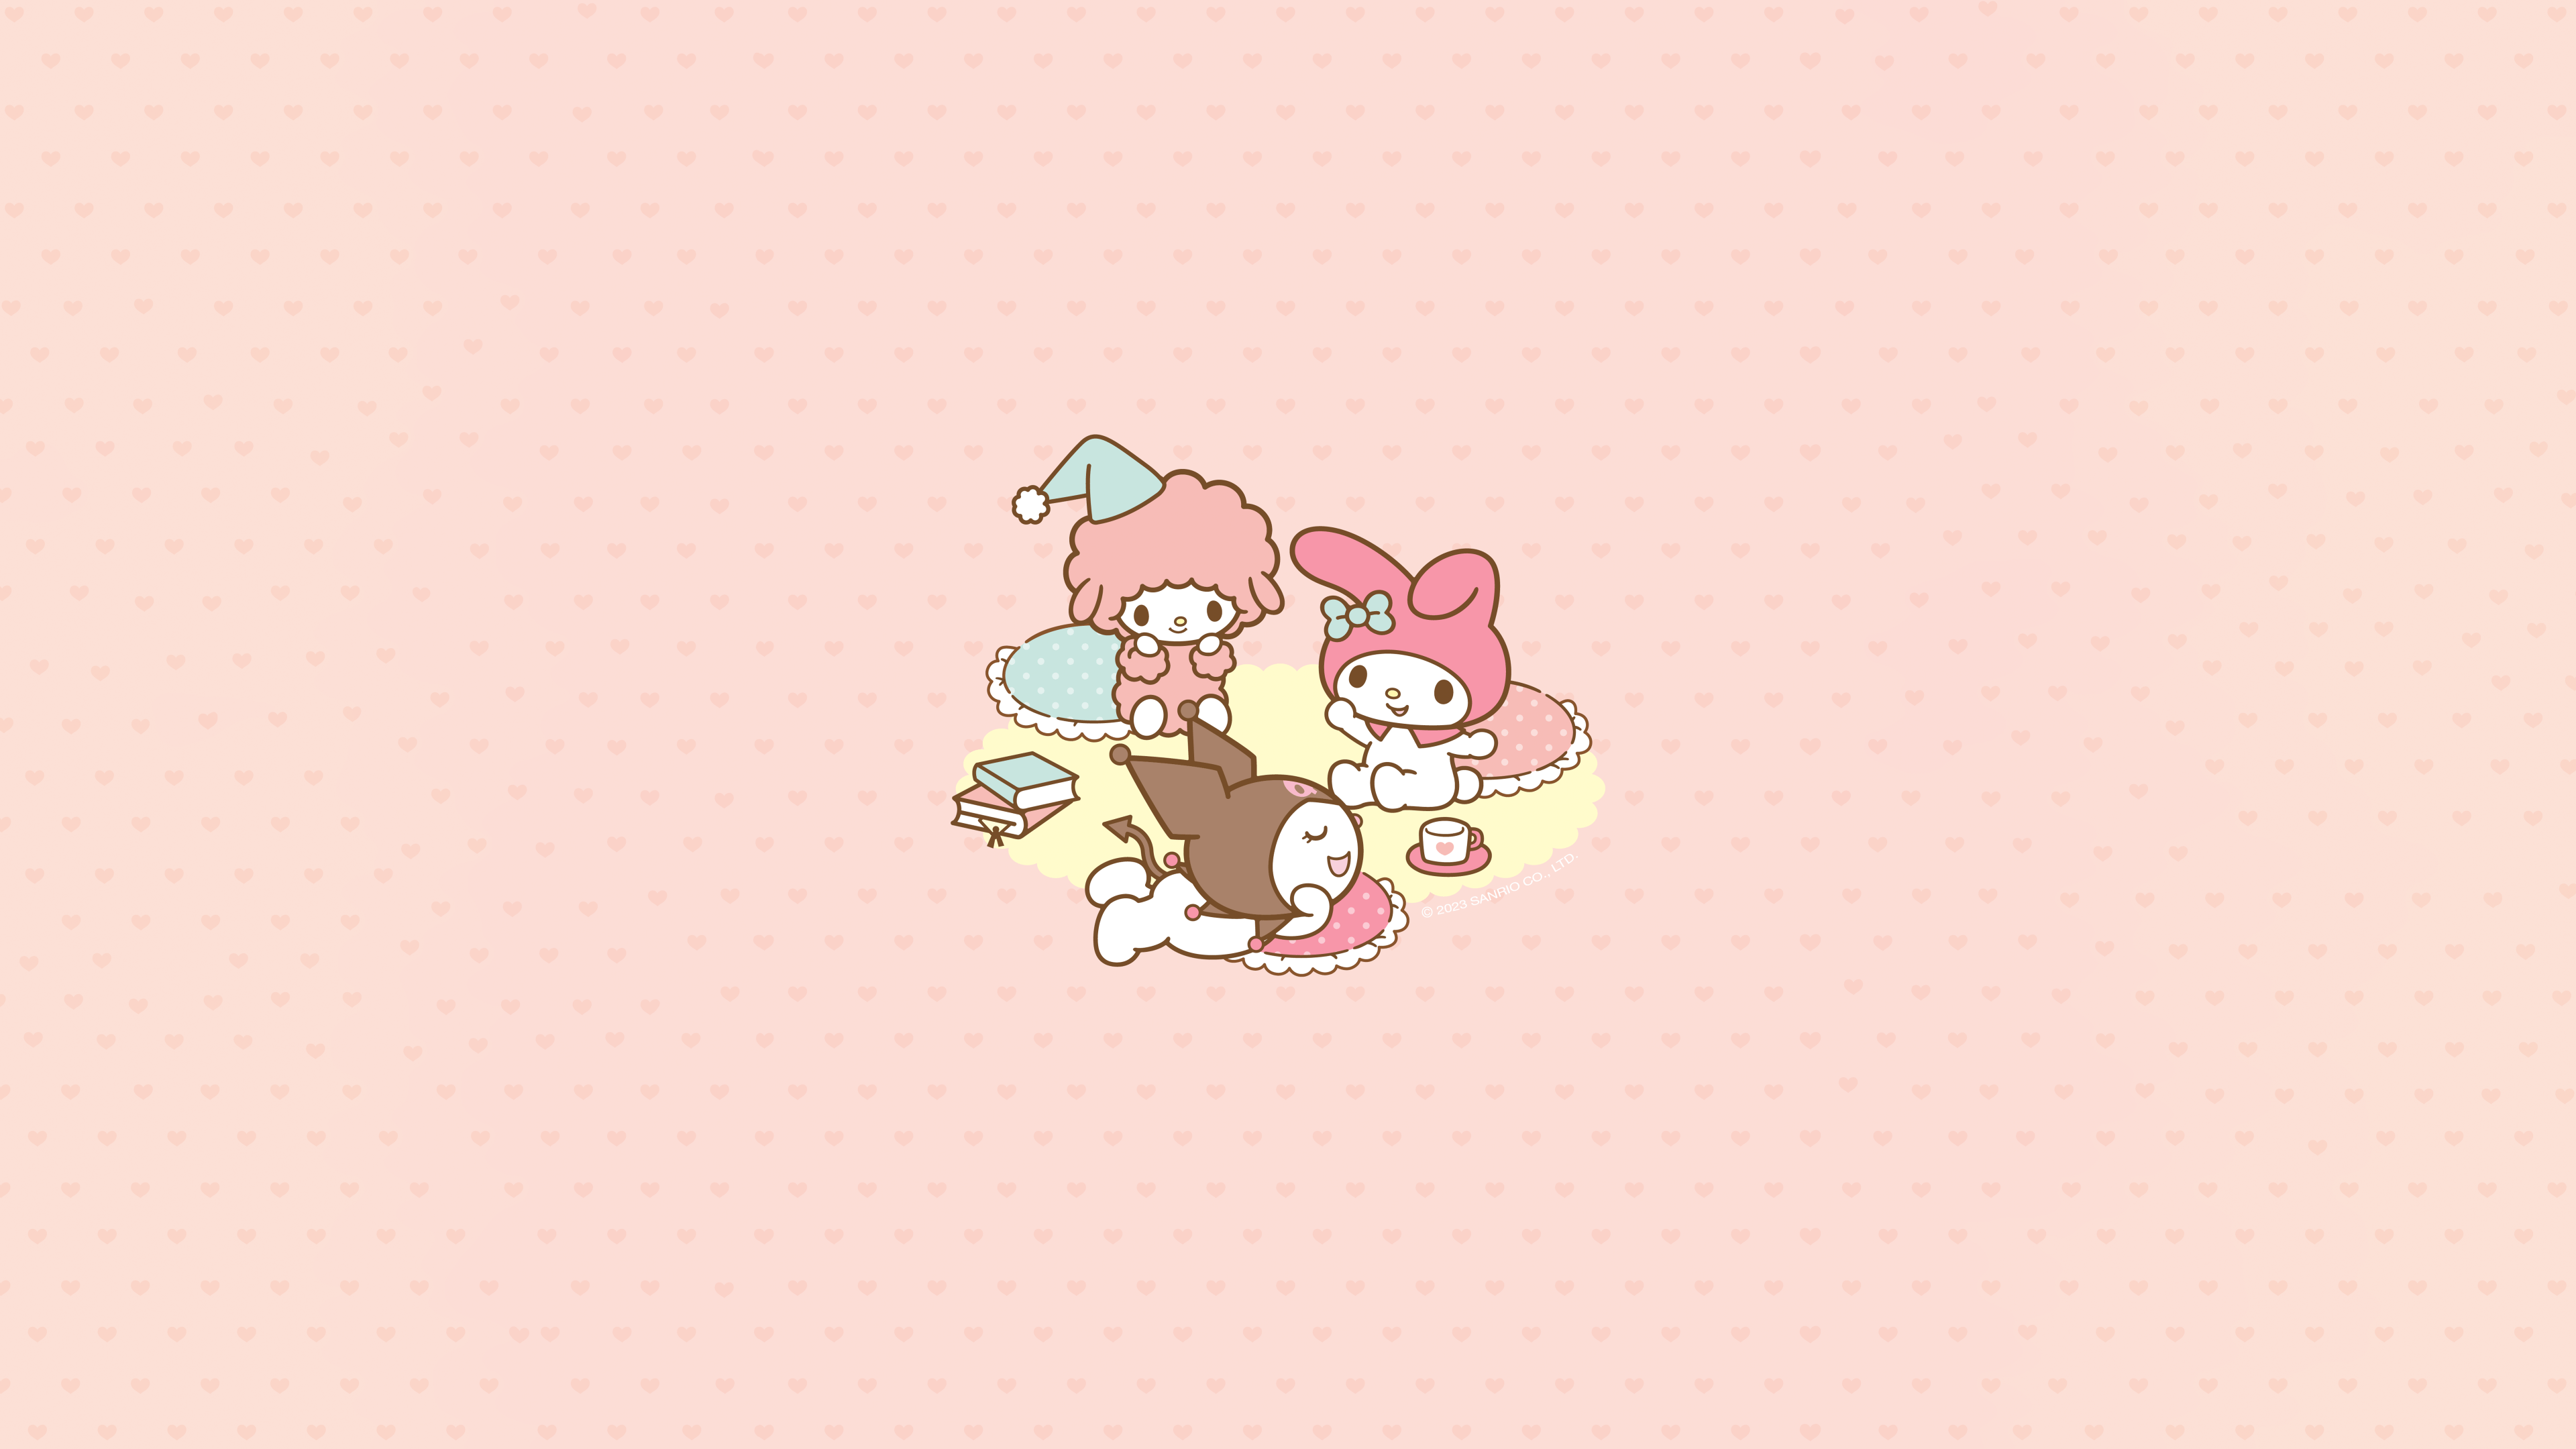 Sanrio Characters on a pink background - My Melody